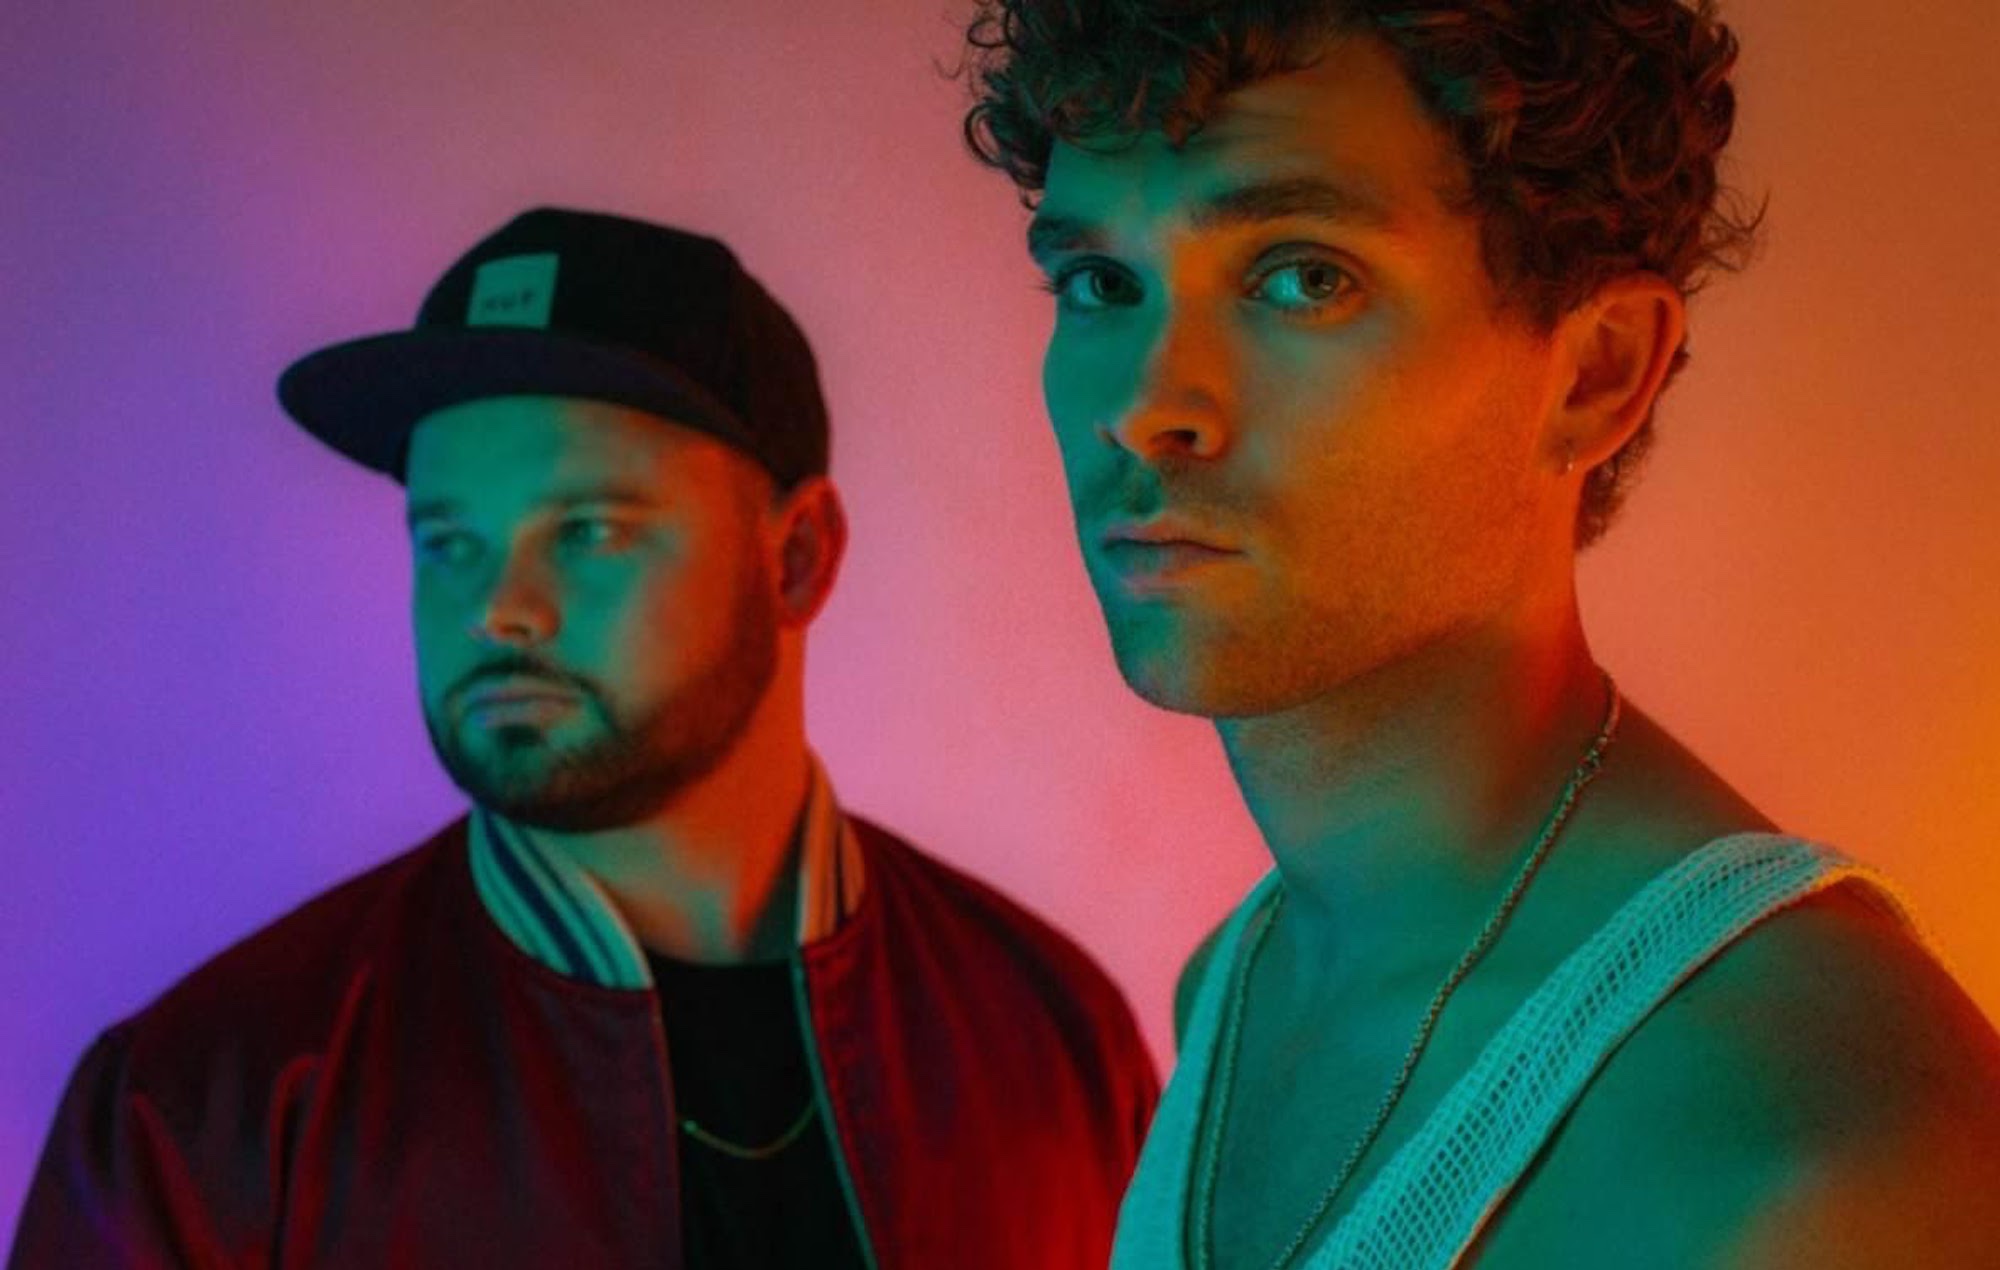 Royal Blood on the video and meaning of ‘Typhoons’: “Everyone can get lost in their own mind”